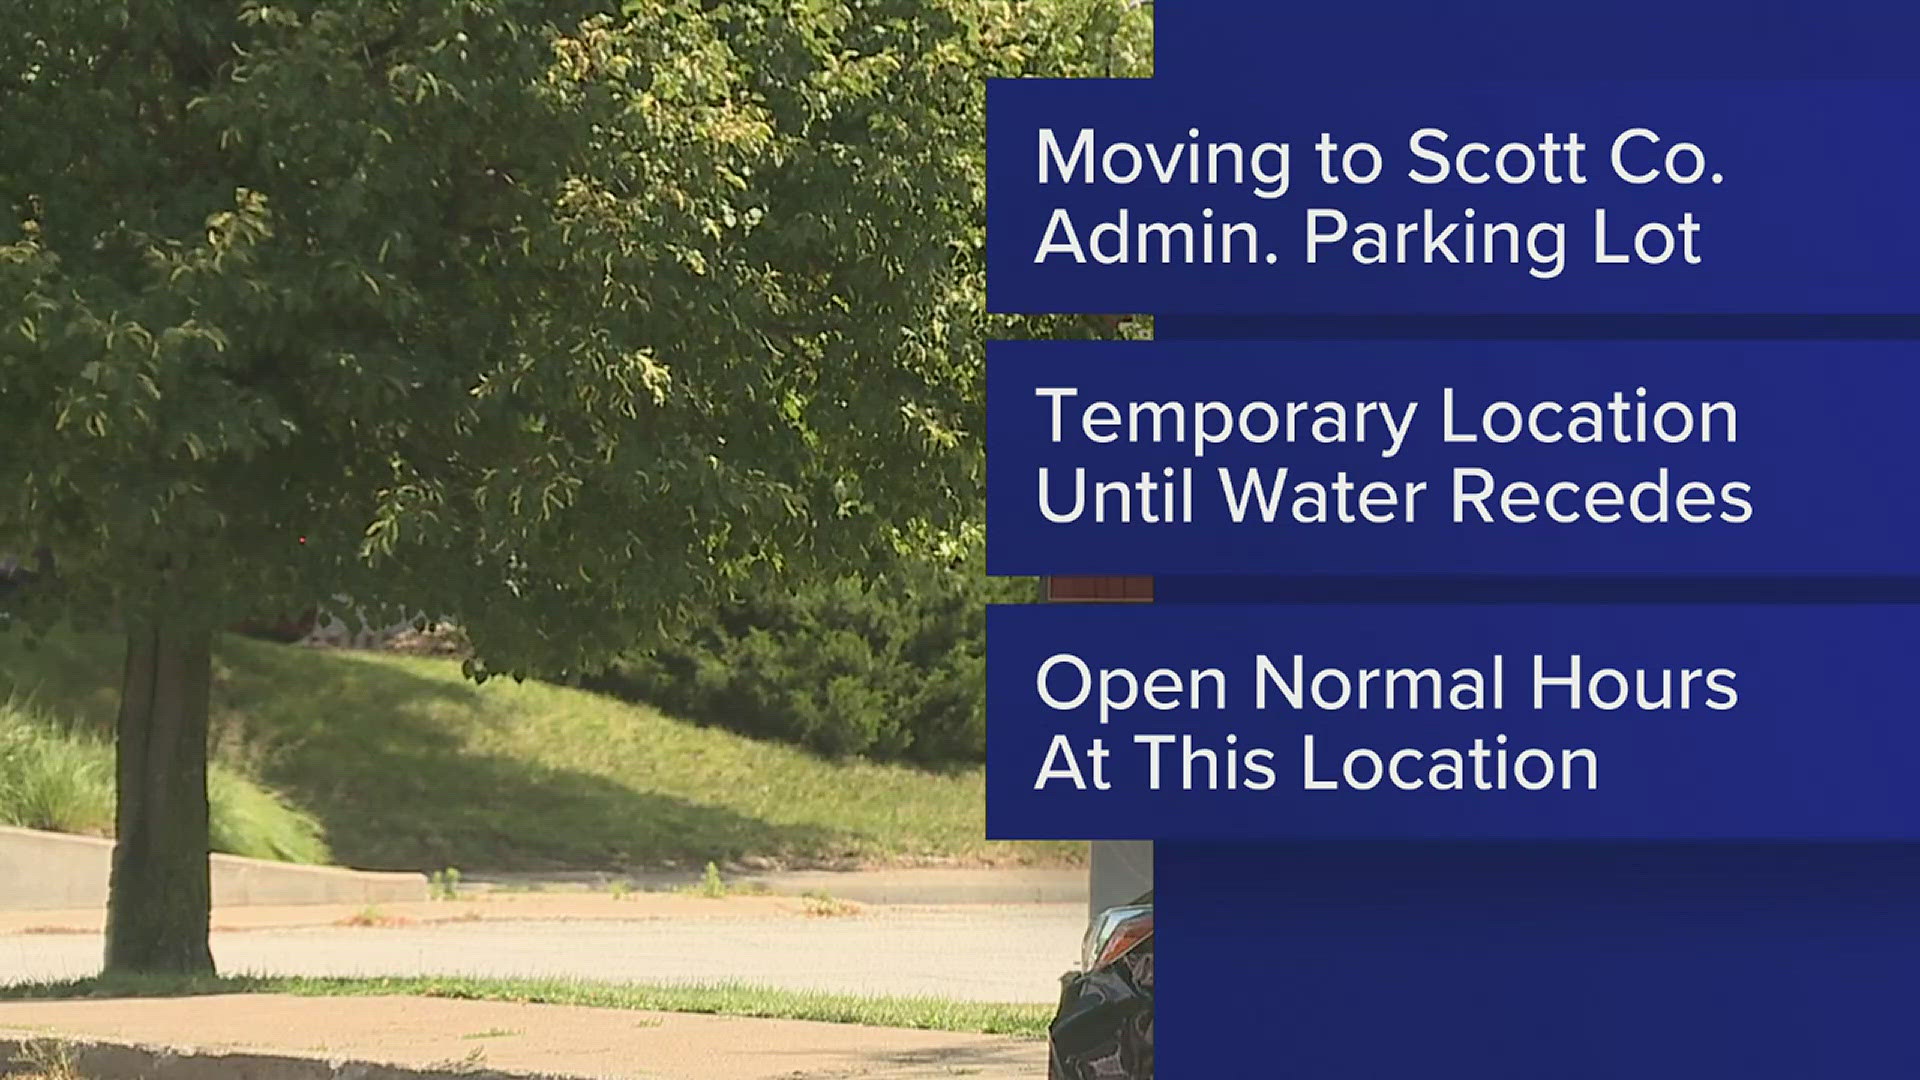 The market will be held in the parking lot of the Scott County Administrative Center until flood waters recede.